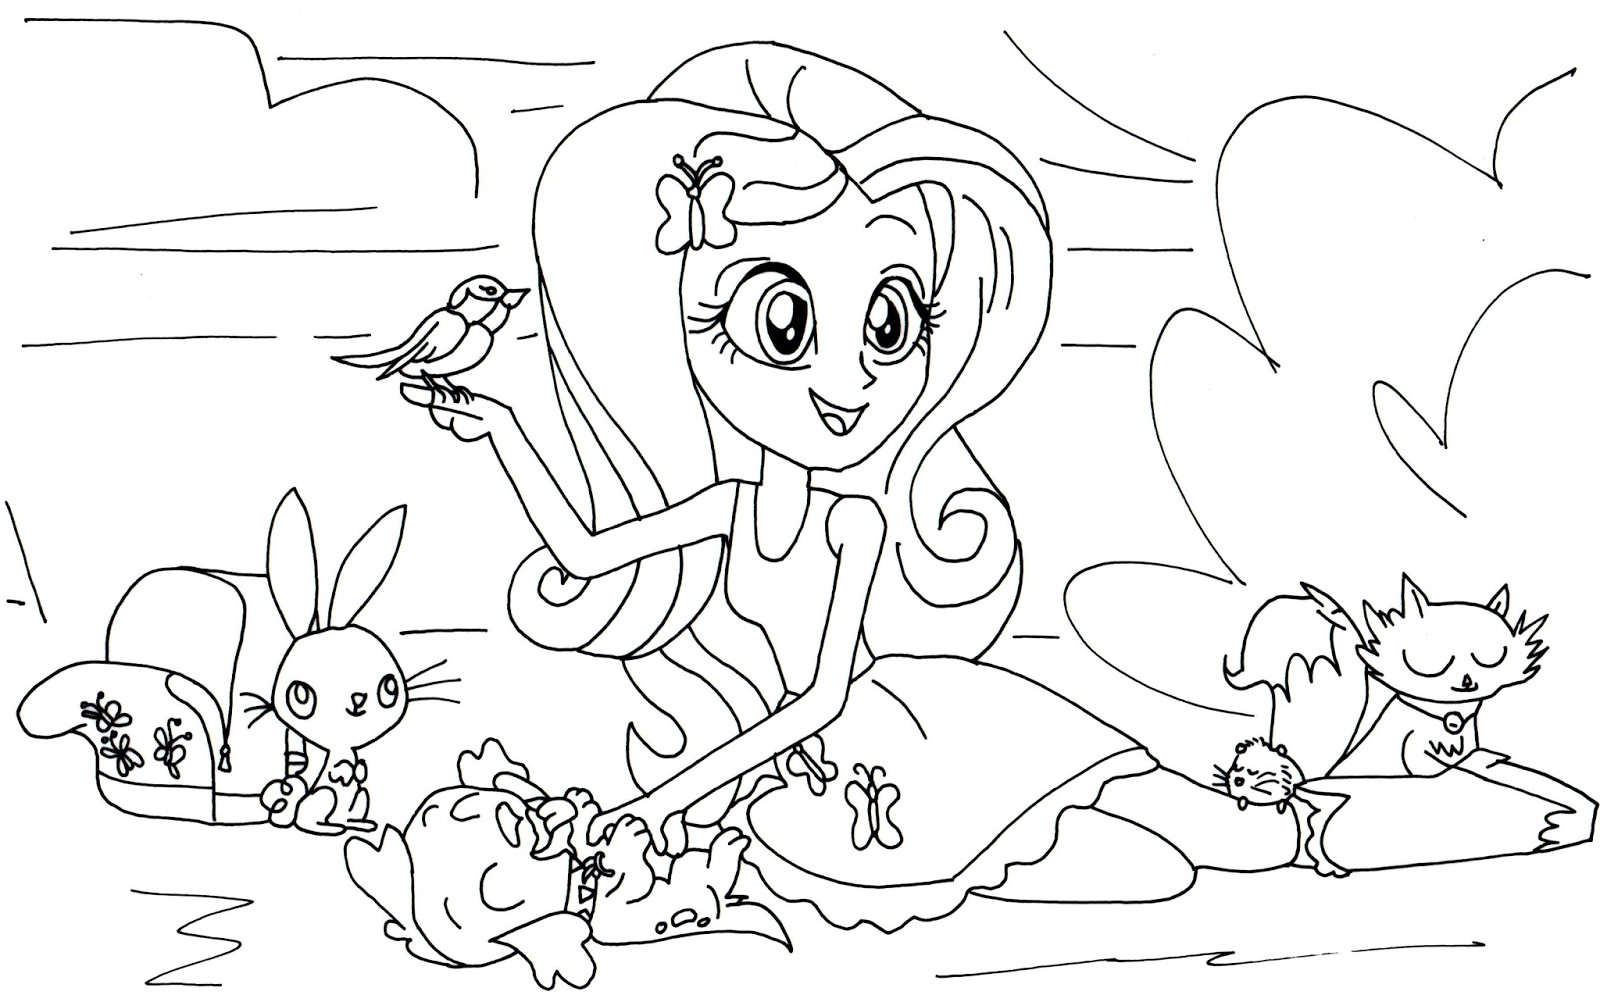 Coloring Sheets For Girls My Little Pony Apple Jack
 My Little Pony Coloring Pages Applejack Equestria Girls